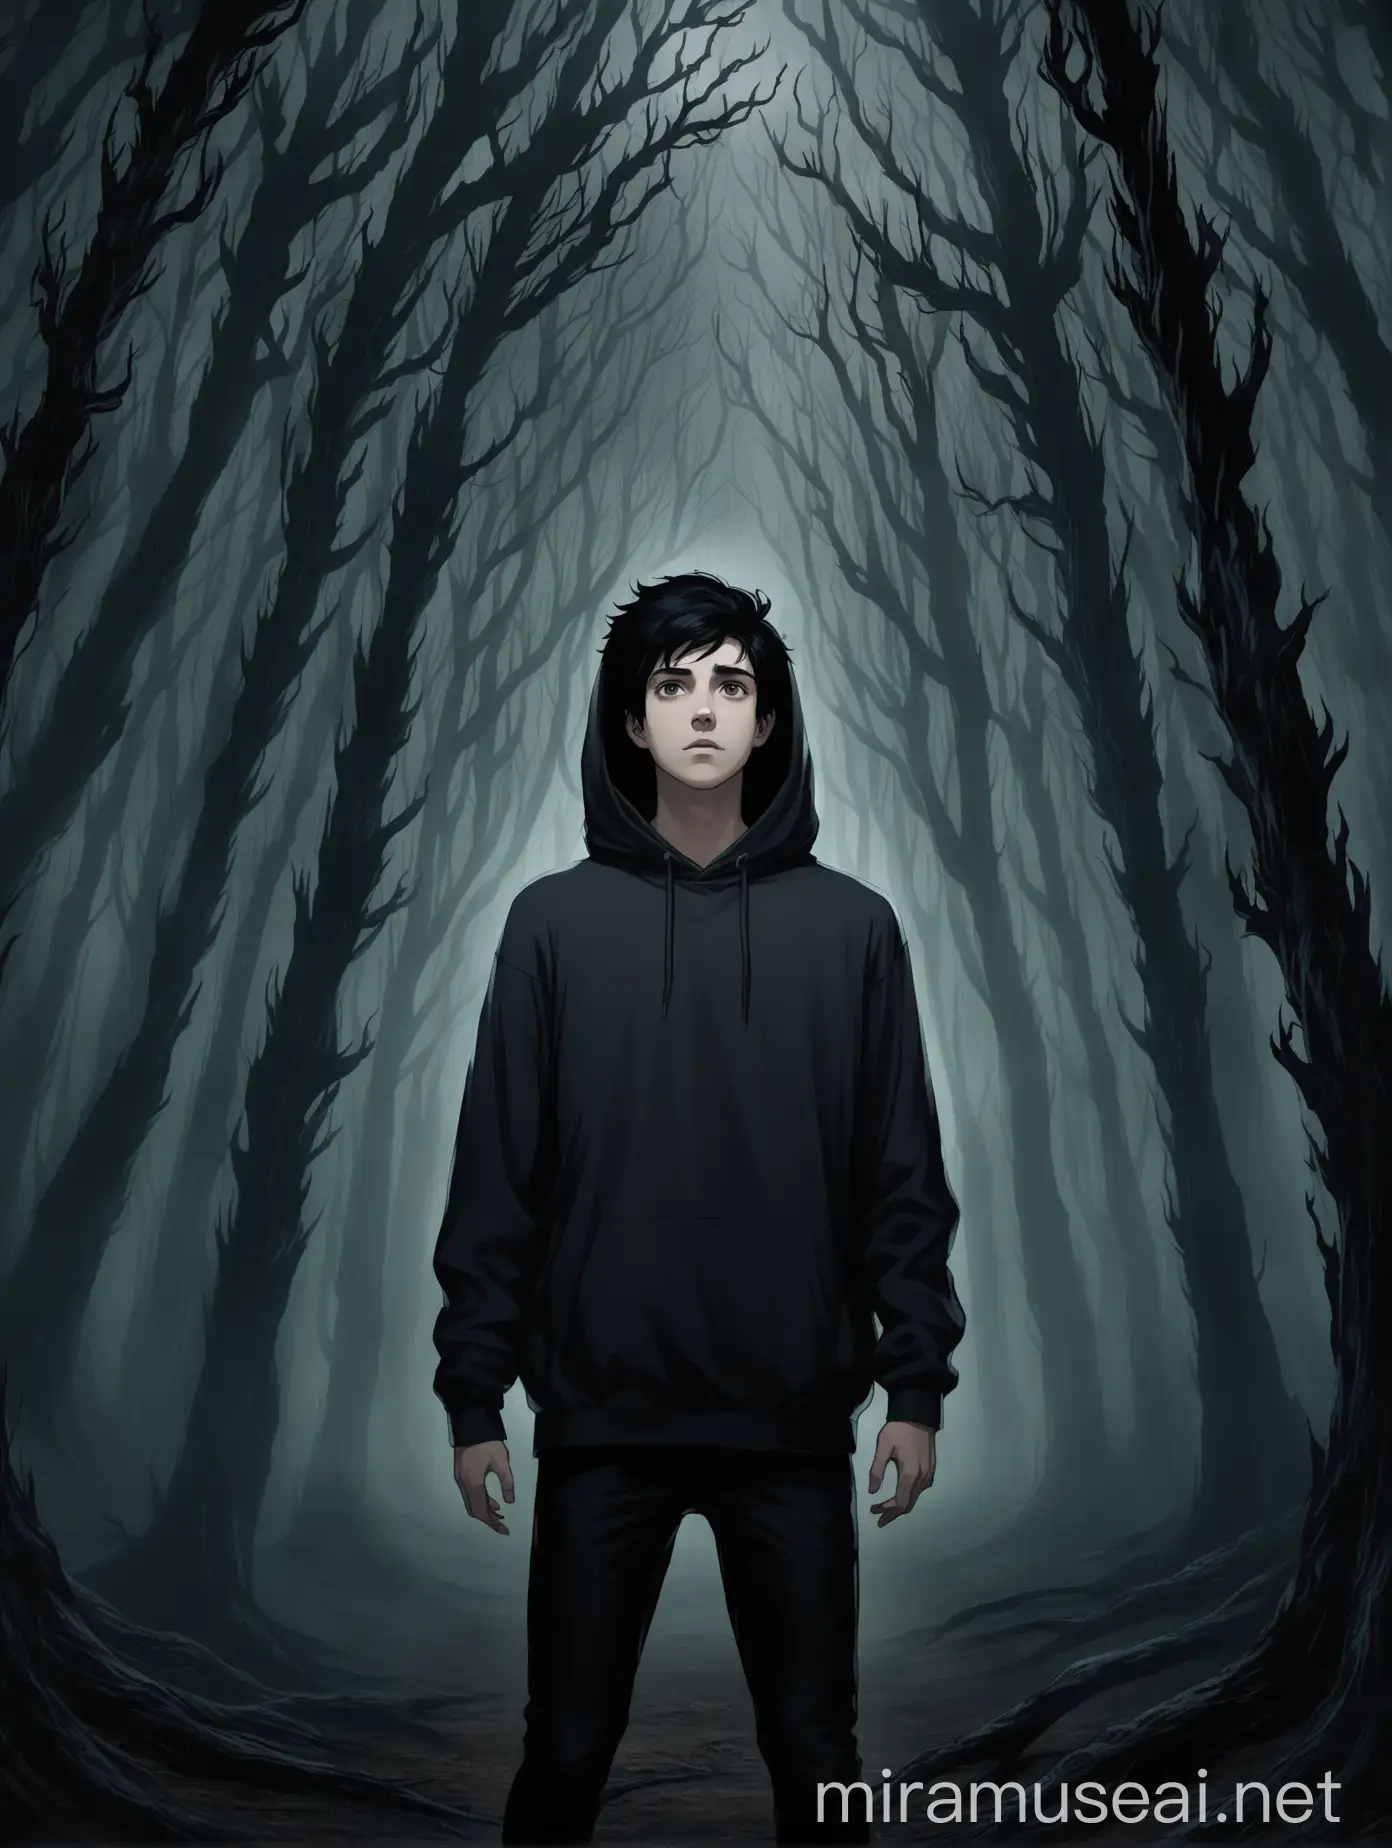 A young man in a dark hoodie with his black hair waving out a bit, with a dark forest with twisted trees behind him and fogs surrounding him in the dark